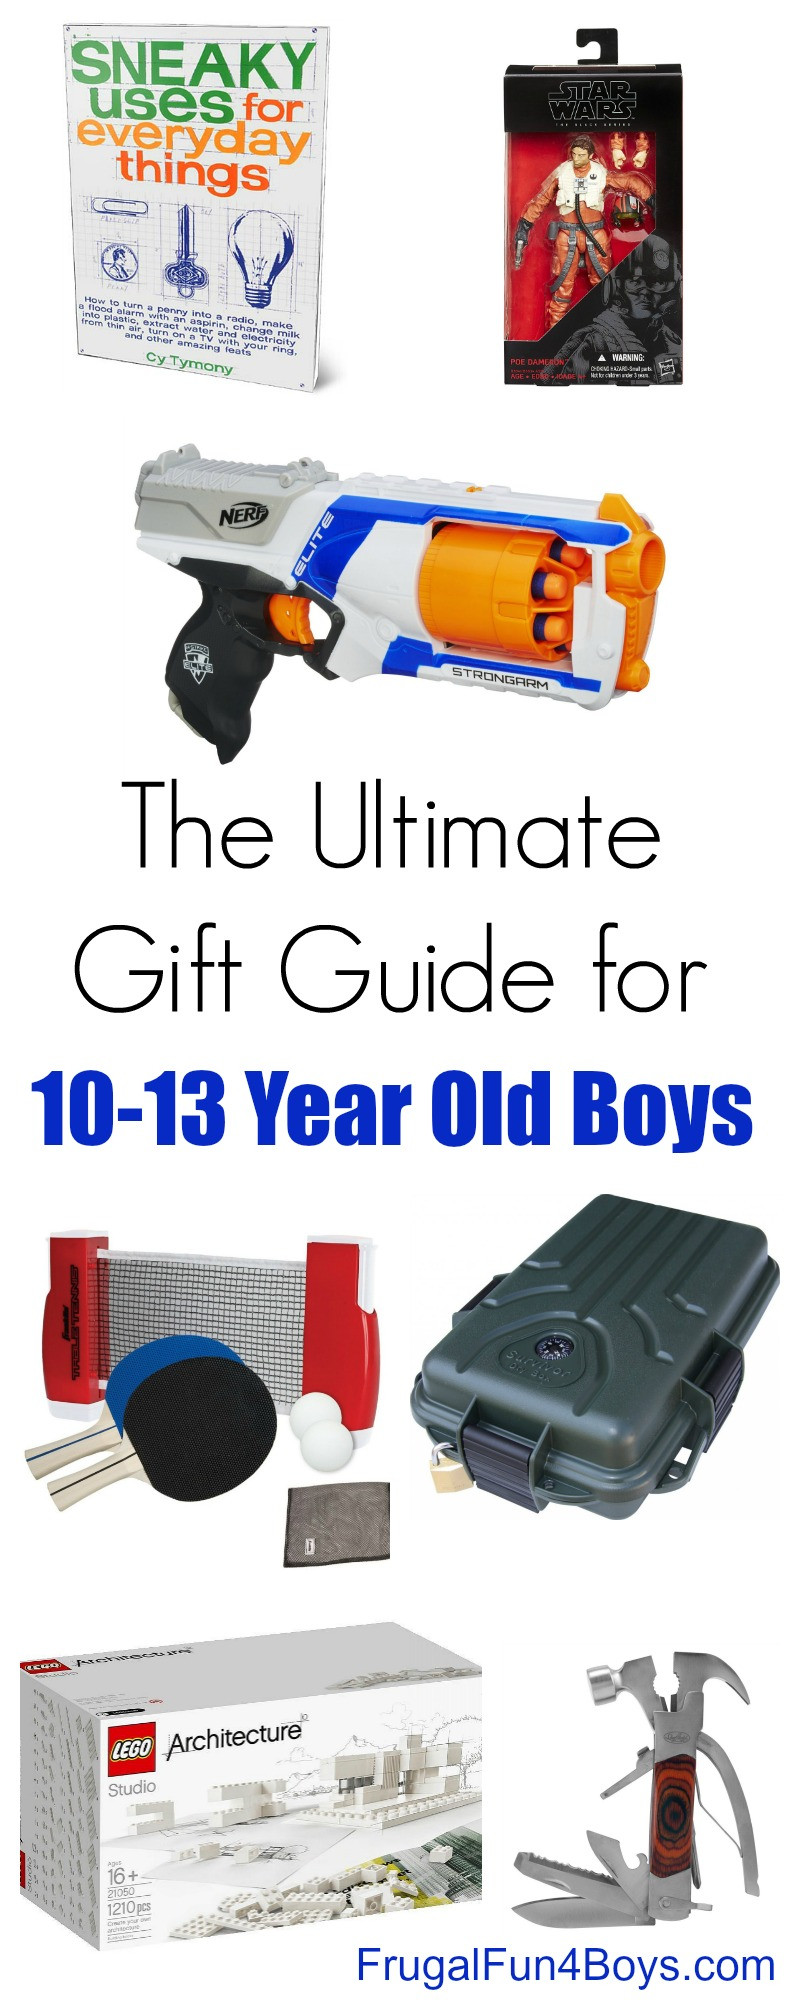 Gift Ideas For 13 Year Old Boys
 Gift Ideas for 10 to 13 Year Old Boys Frugal Fun For